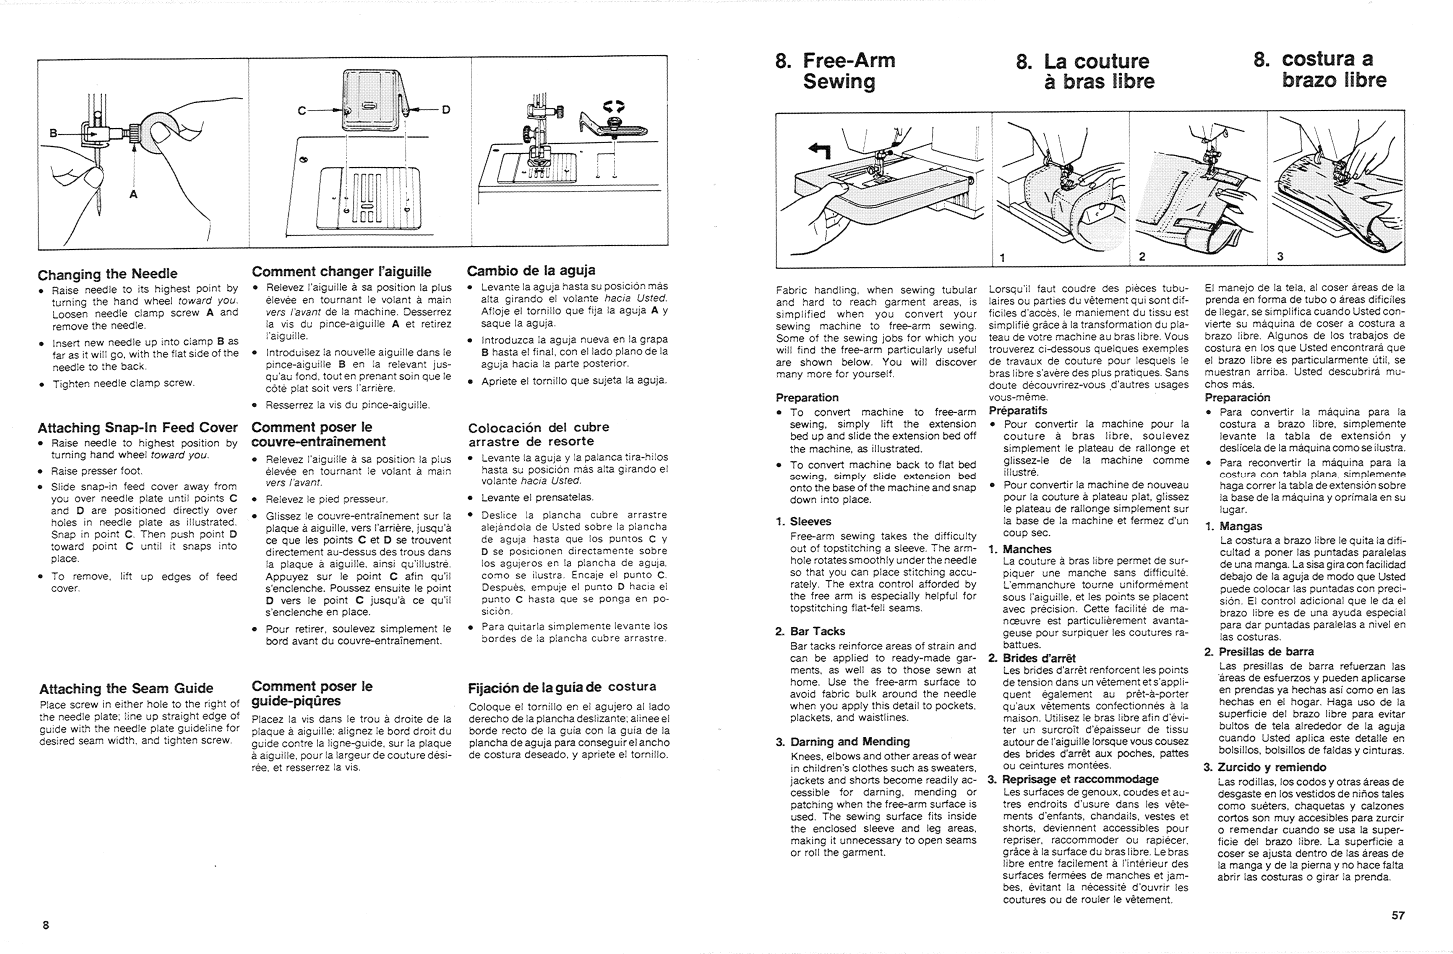 Changing the needle, Attaching snap-in feed cover, Comment changer i’aiguilie | Comment poser le couvre-entraînement, Cambio de ia aguja, Attaching the seam guide, Comment poser le guide-piqûres, Fijación de ia guía de costura | SINGER 3015 User Manual | Page 10 / 68